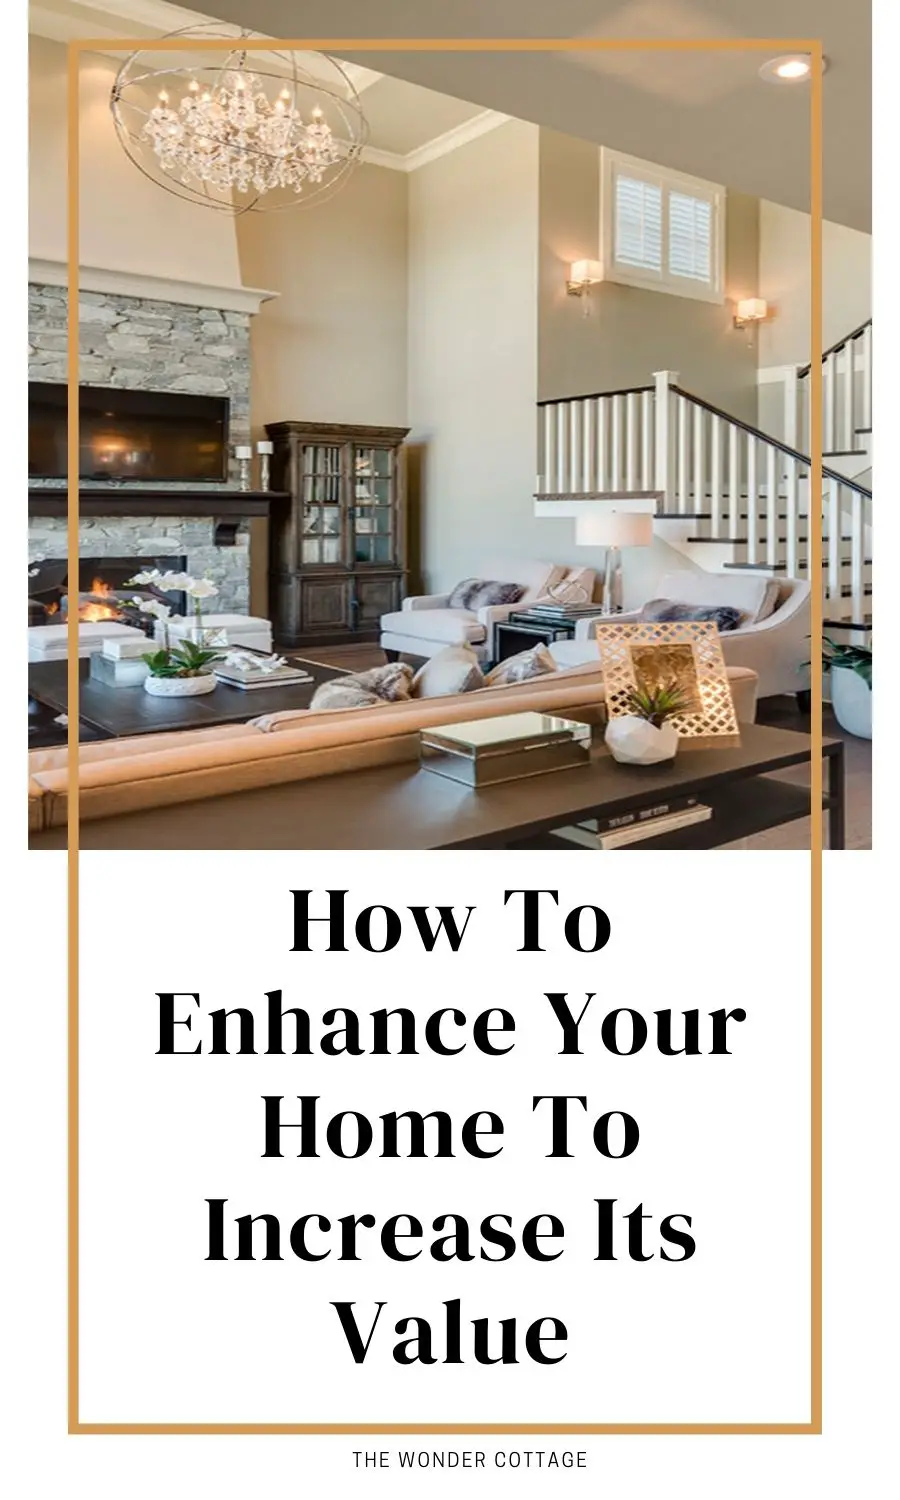 How To Enhance Your Home To Increase Its Value